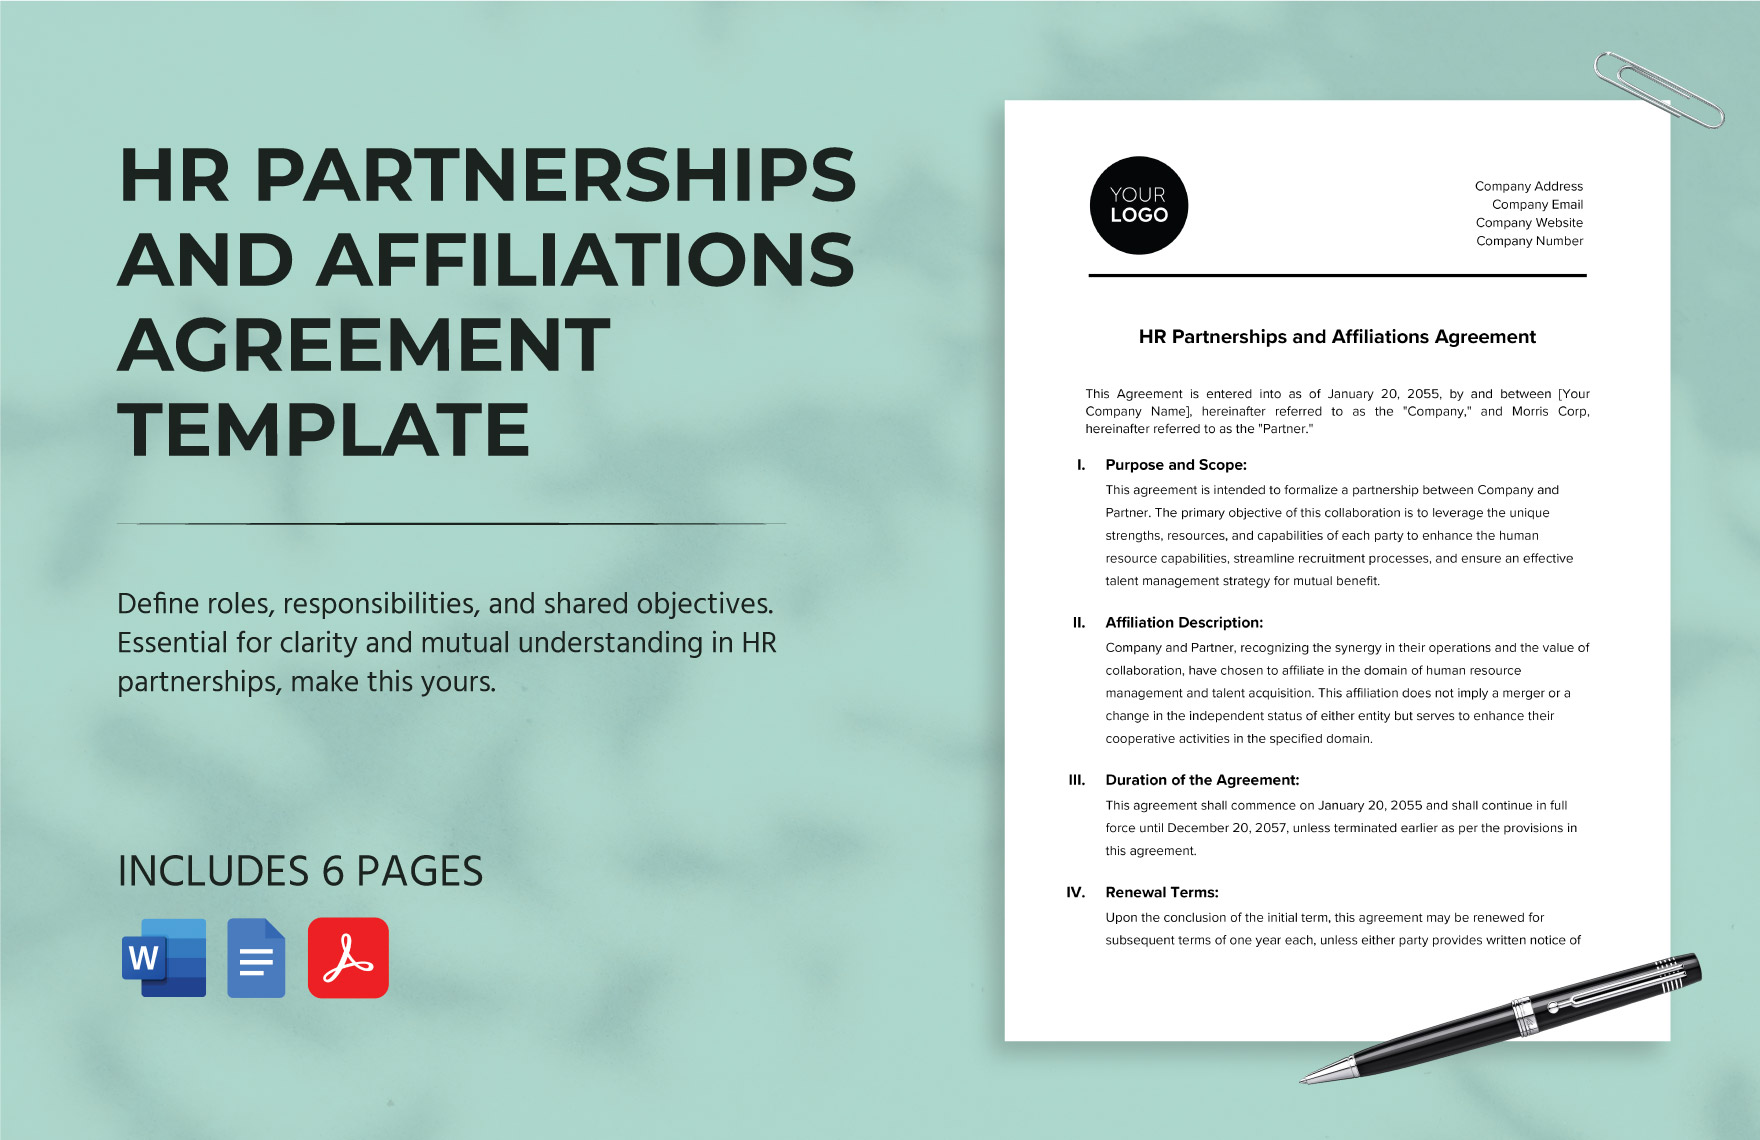 HR Partnerships and Affiliations Agreement Template in Word, Google Docs, PDF